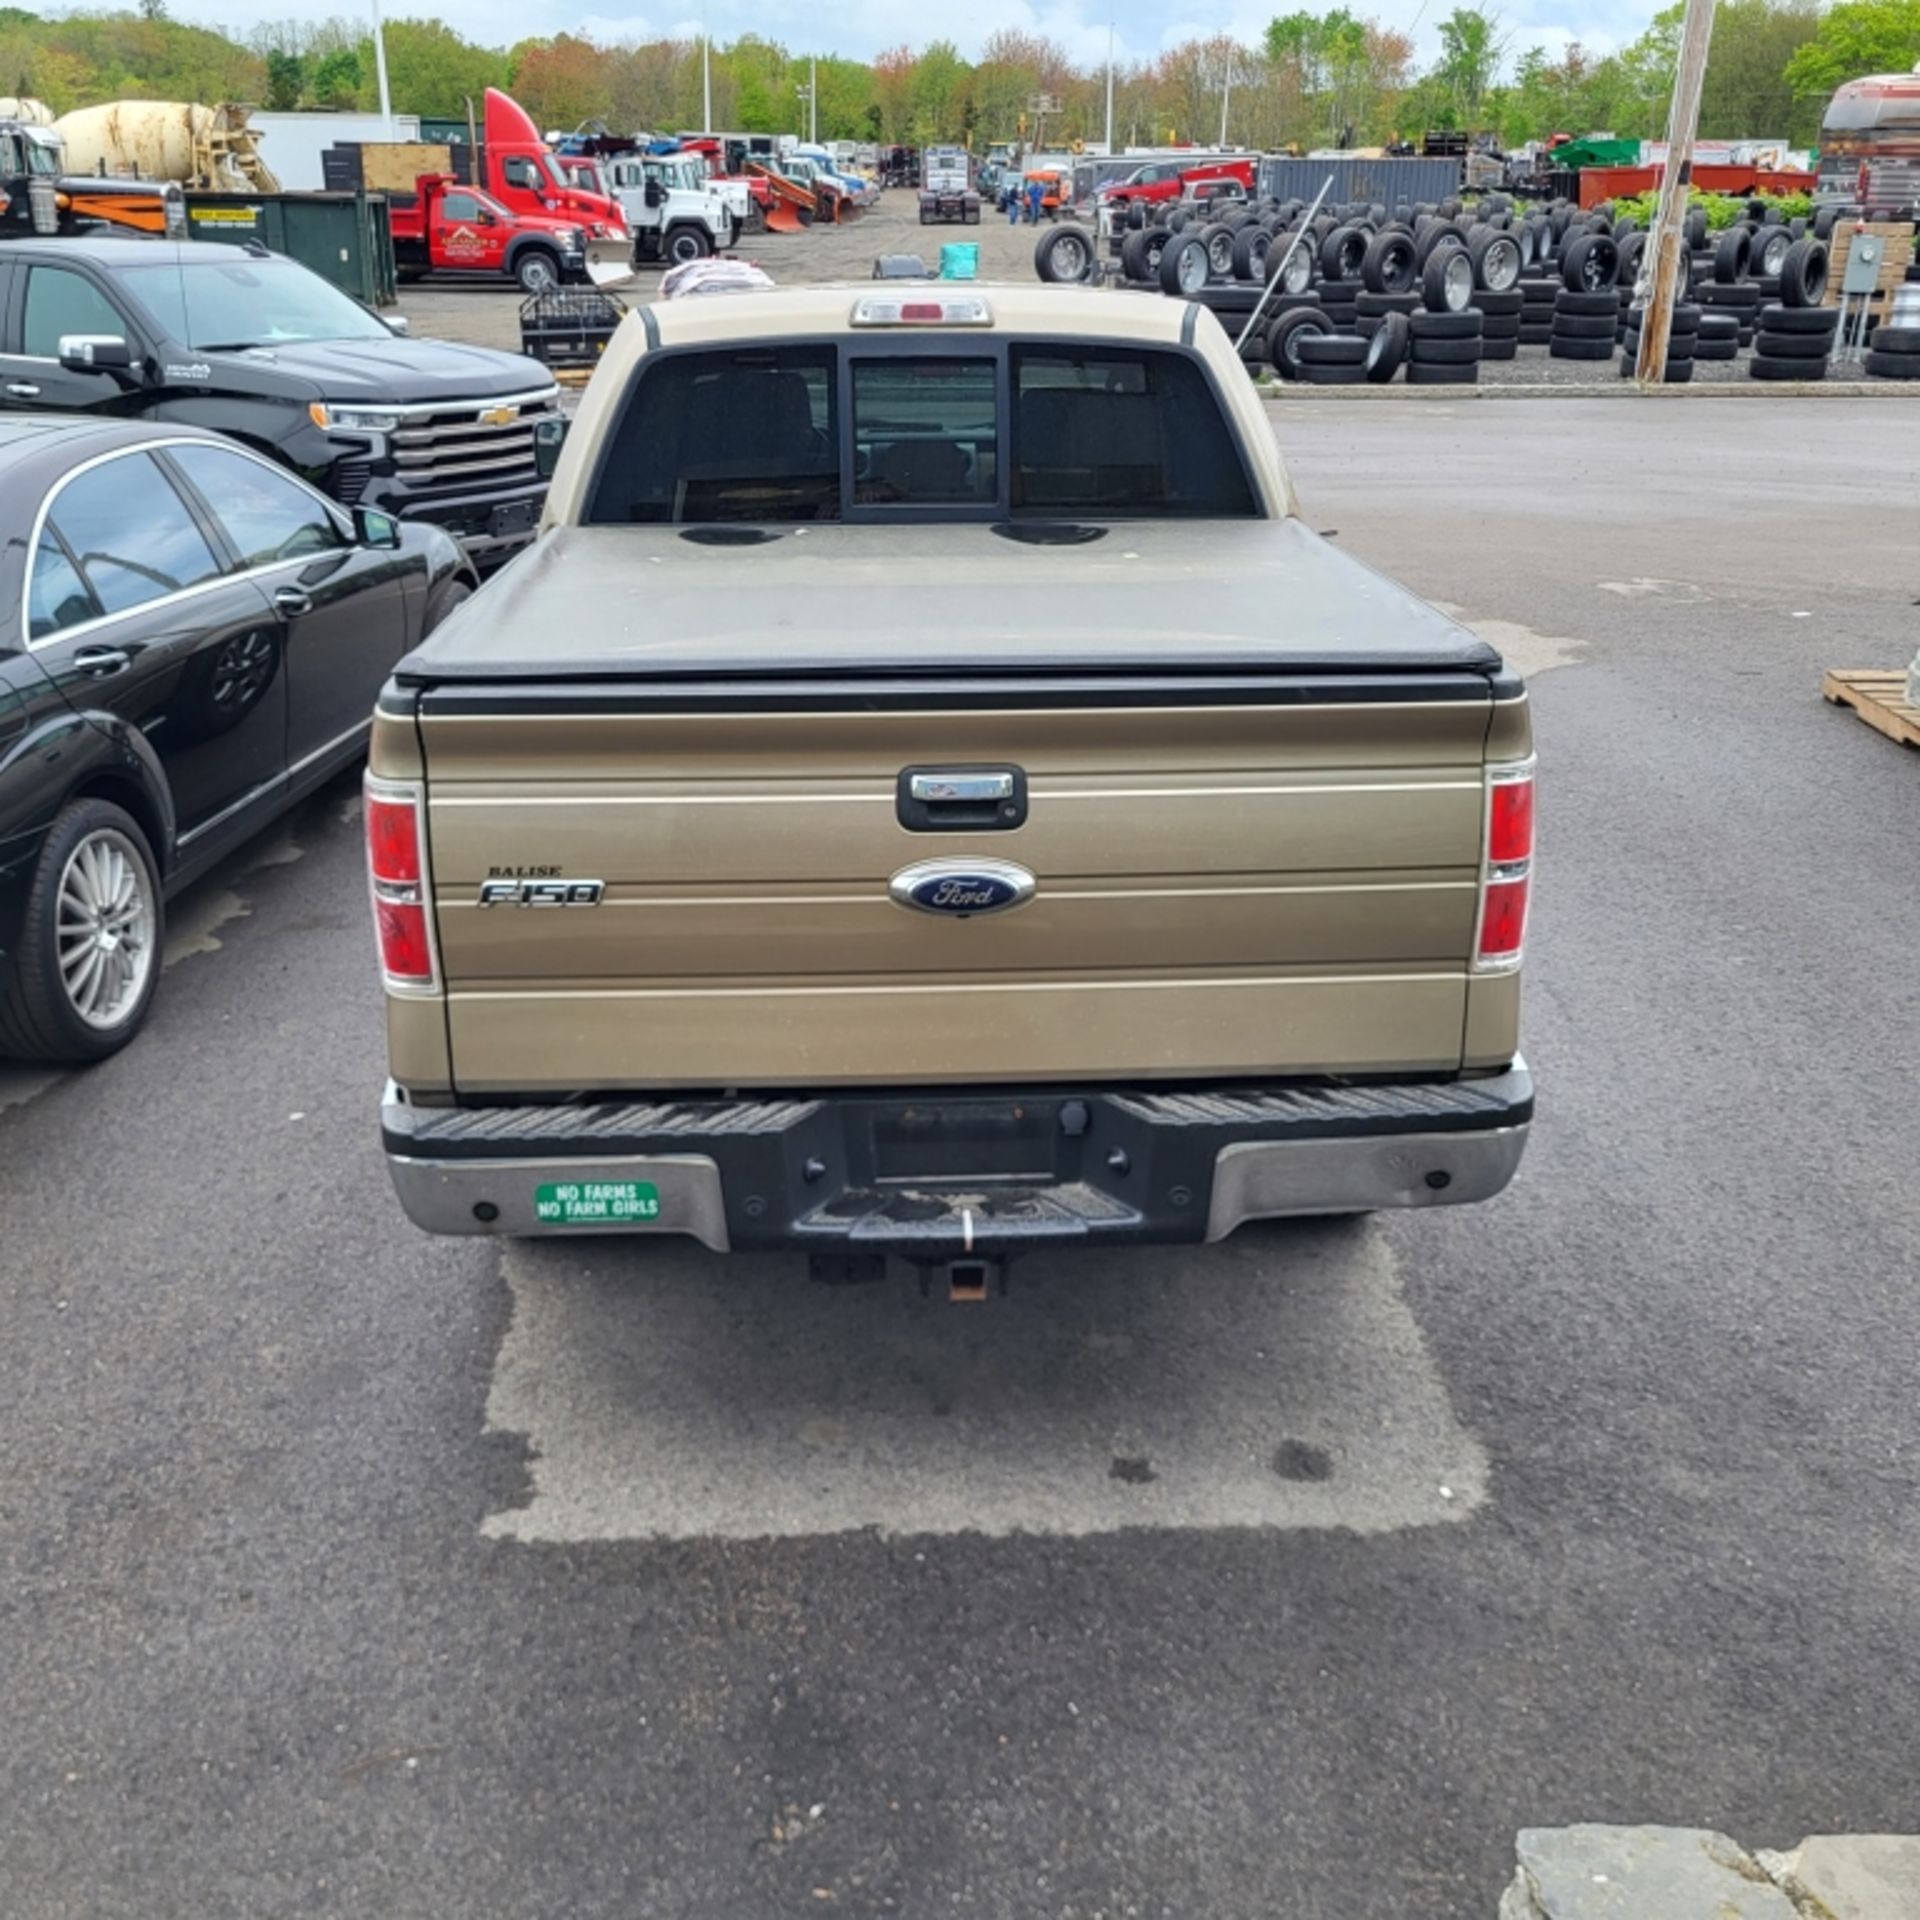 2014 Ford F150 Pickup - Image 10 of 20